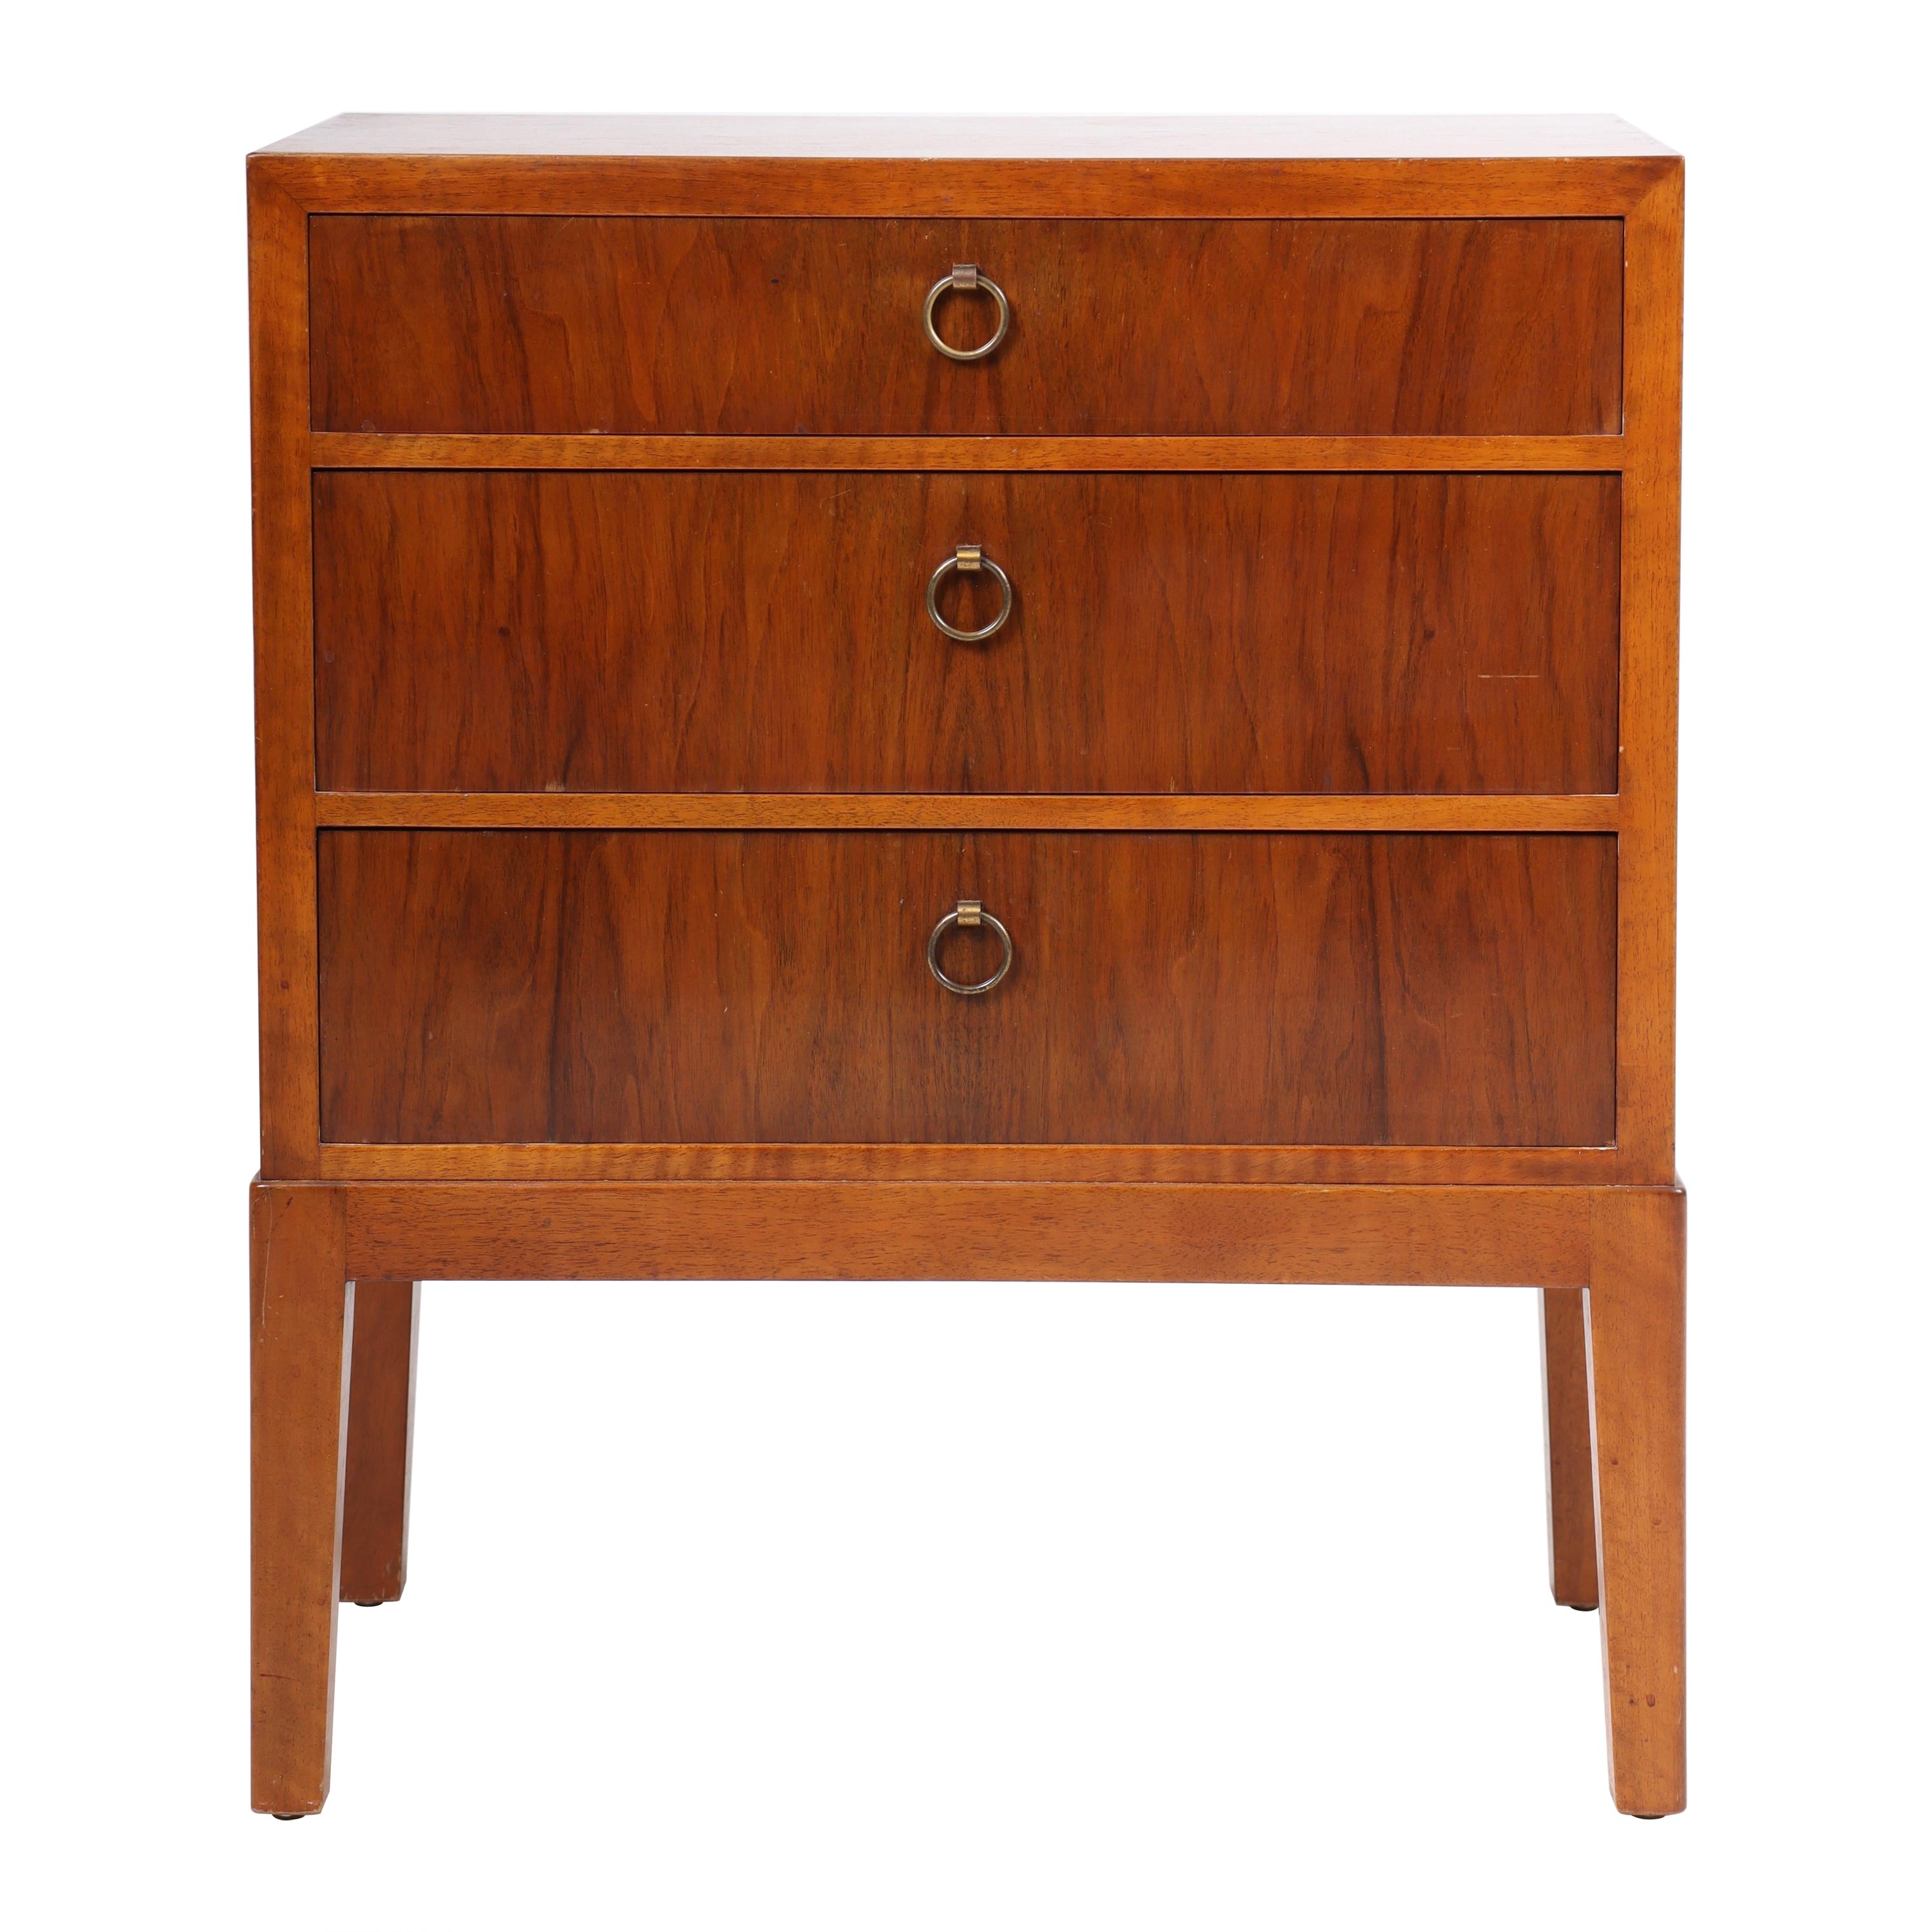 Midcentury Chest of Drawers by Thorald Madsen, Danish Design, 1950s